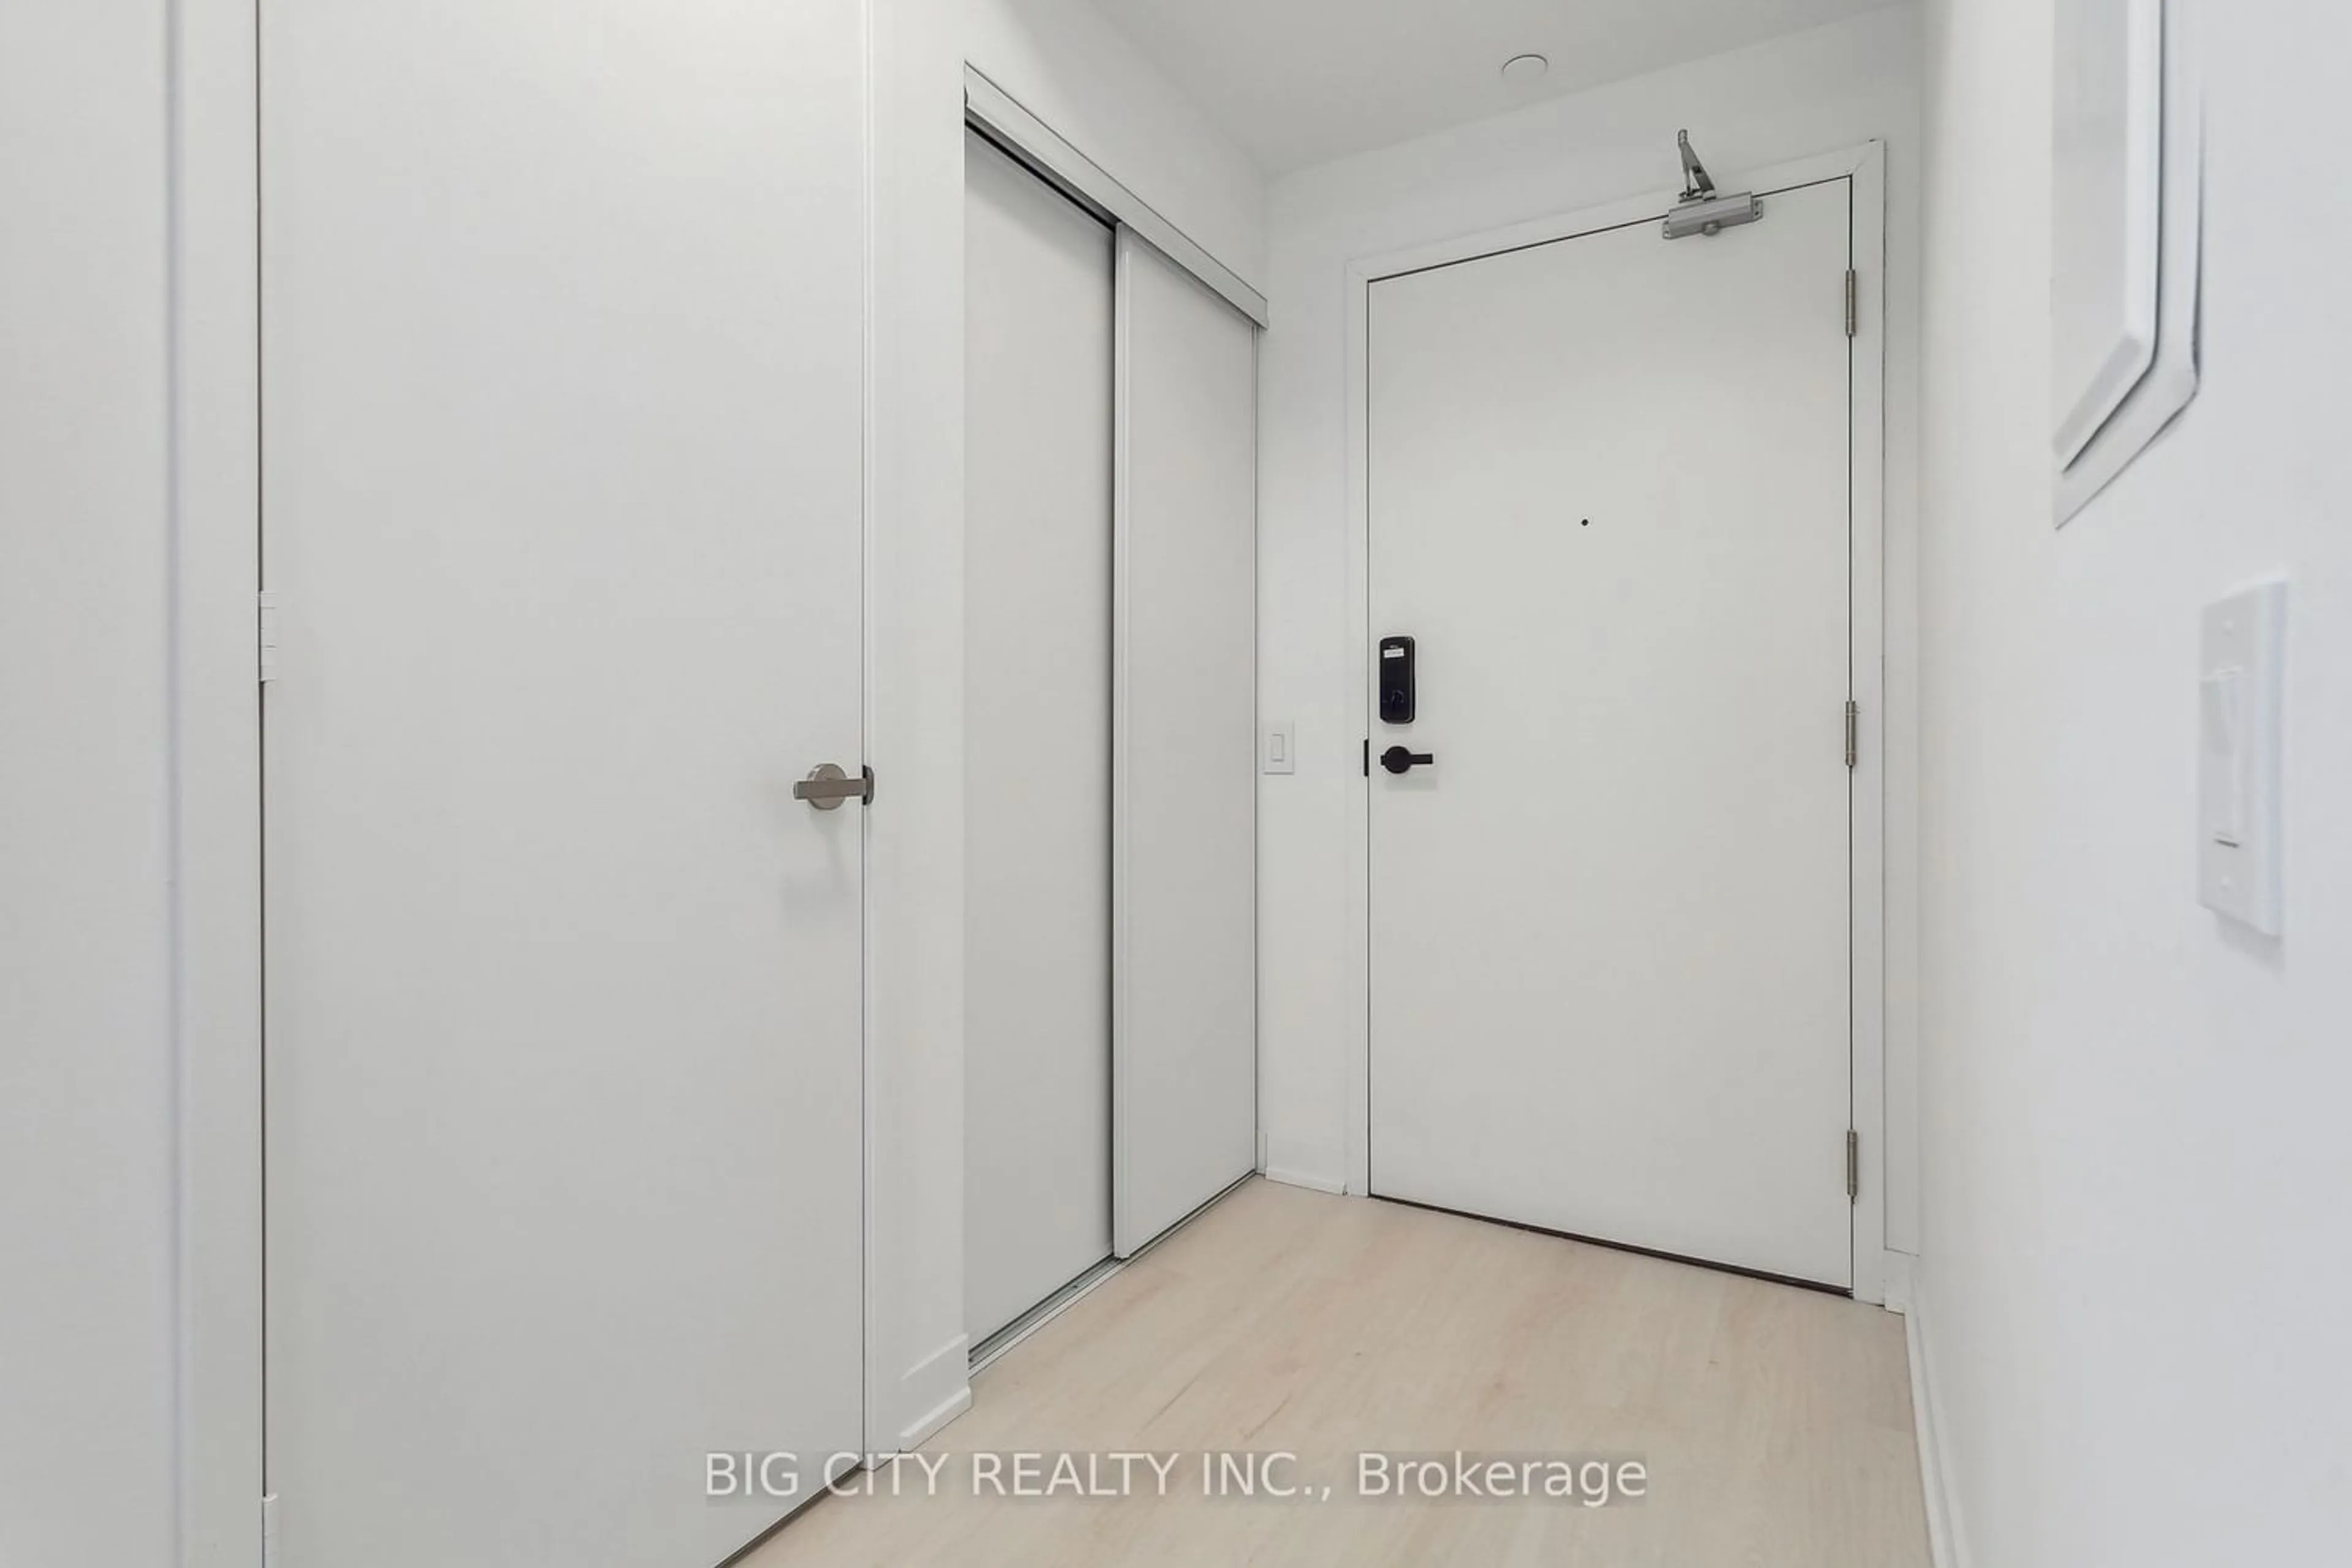 Indoor entryway for 3900 Confederation Pkwy #4112, Mississauga Ontario L5B 0M3